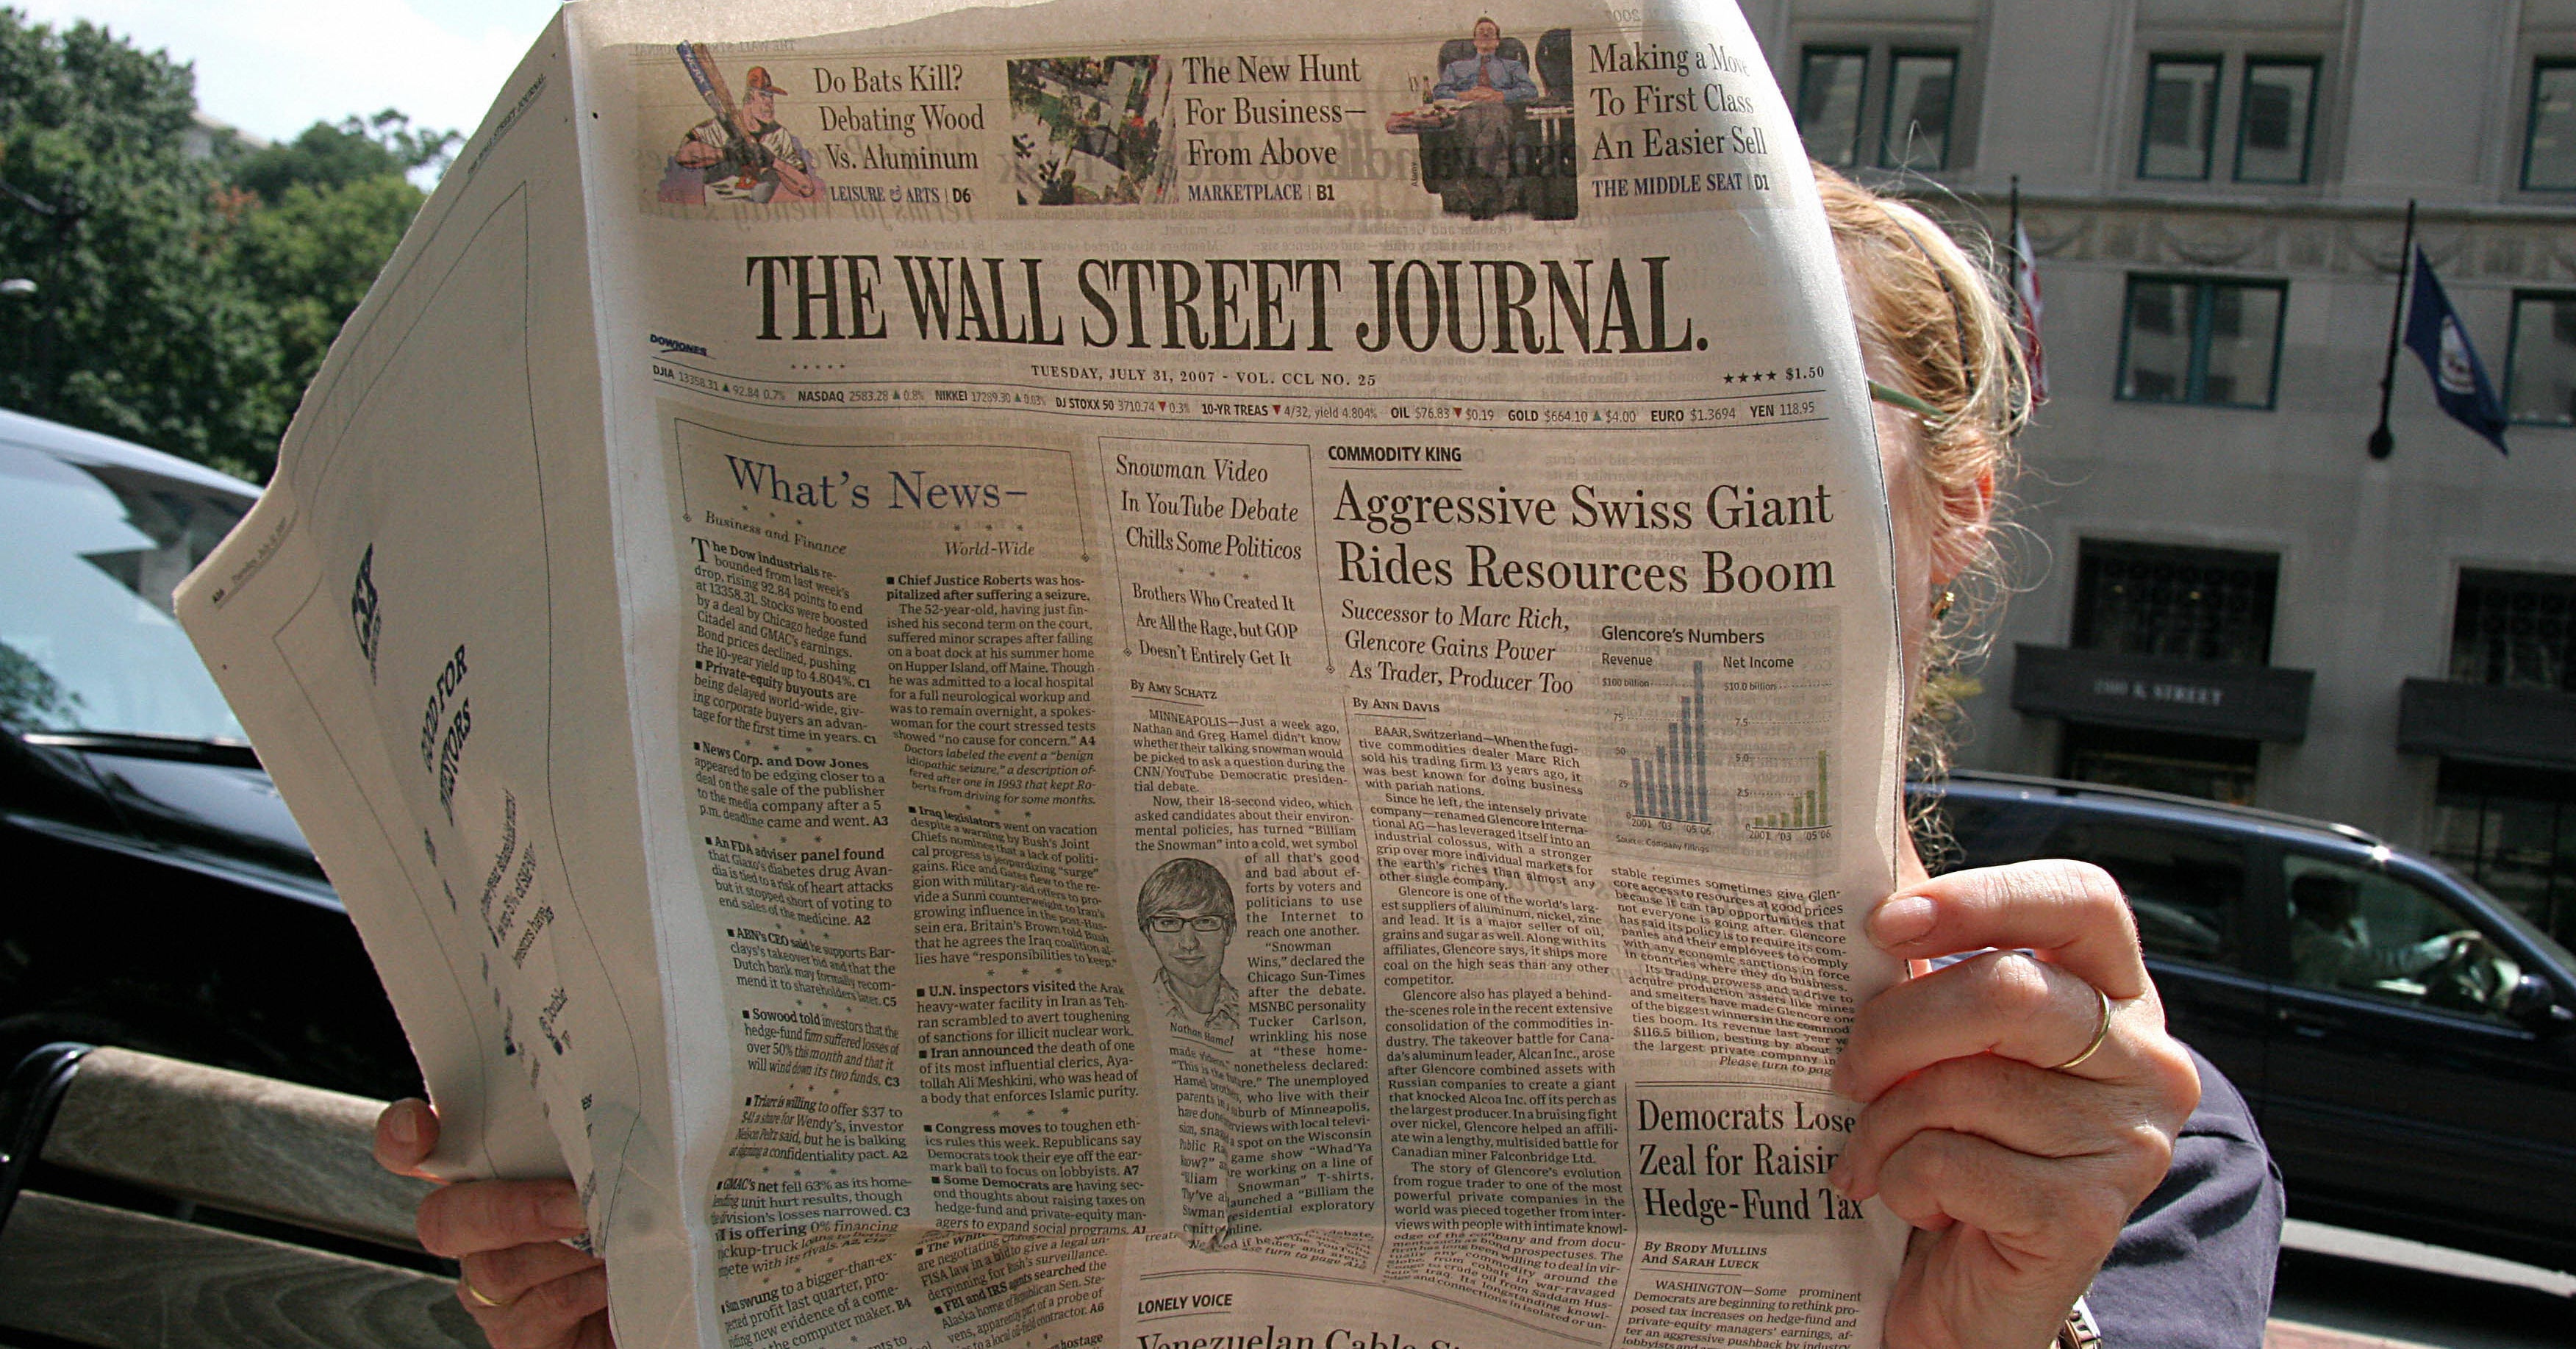 A Leaked Internal Report Reveals The Wall Street Journal Is Struggling With Aging Readers And Covering Race